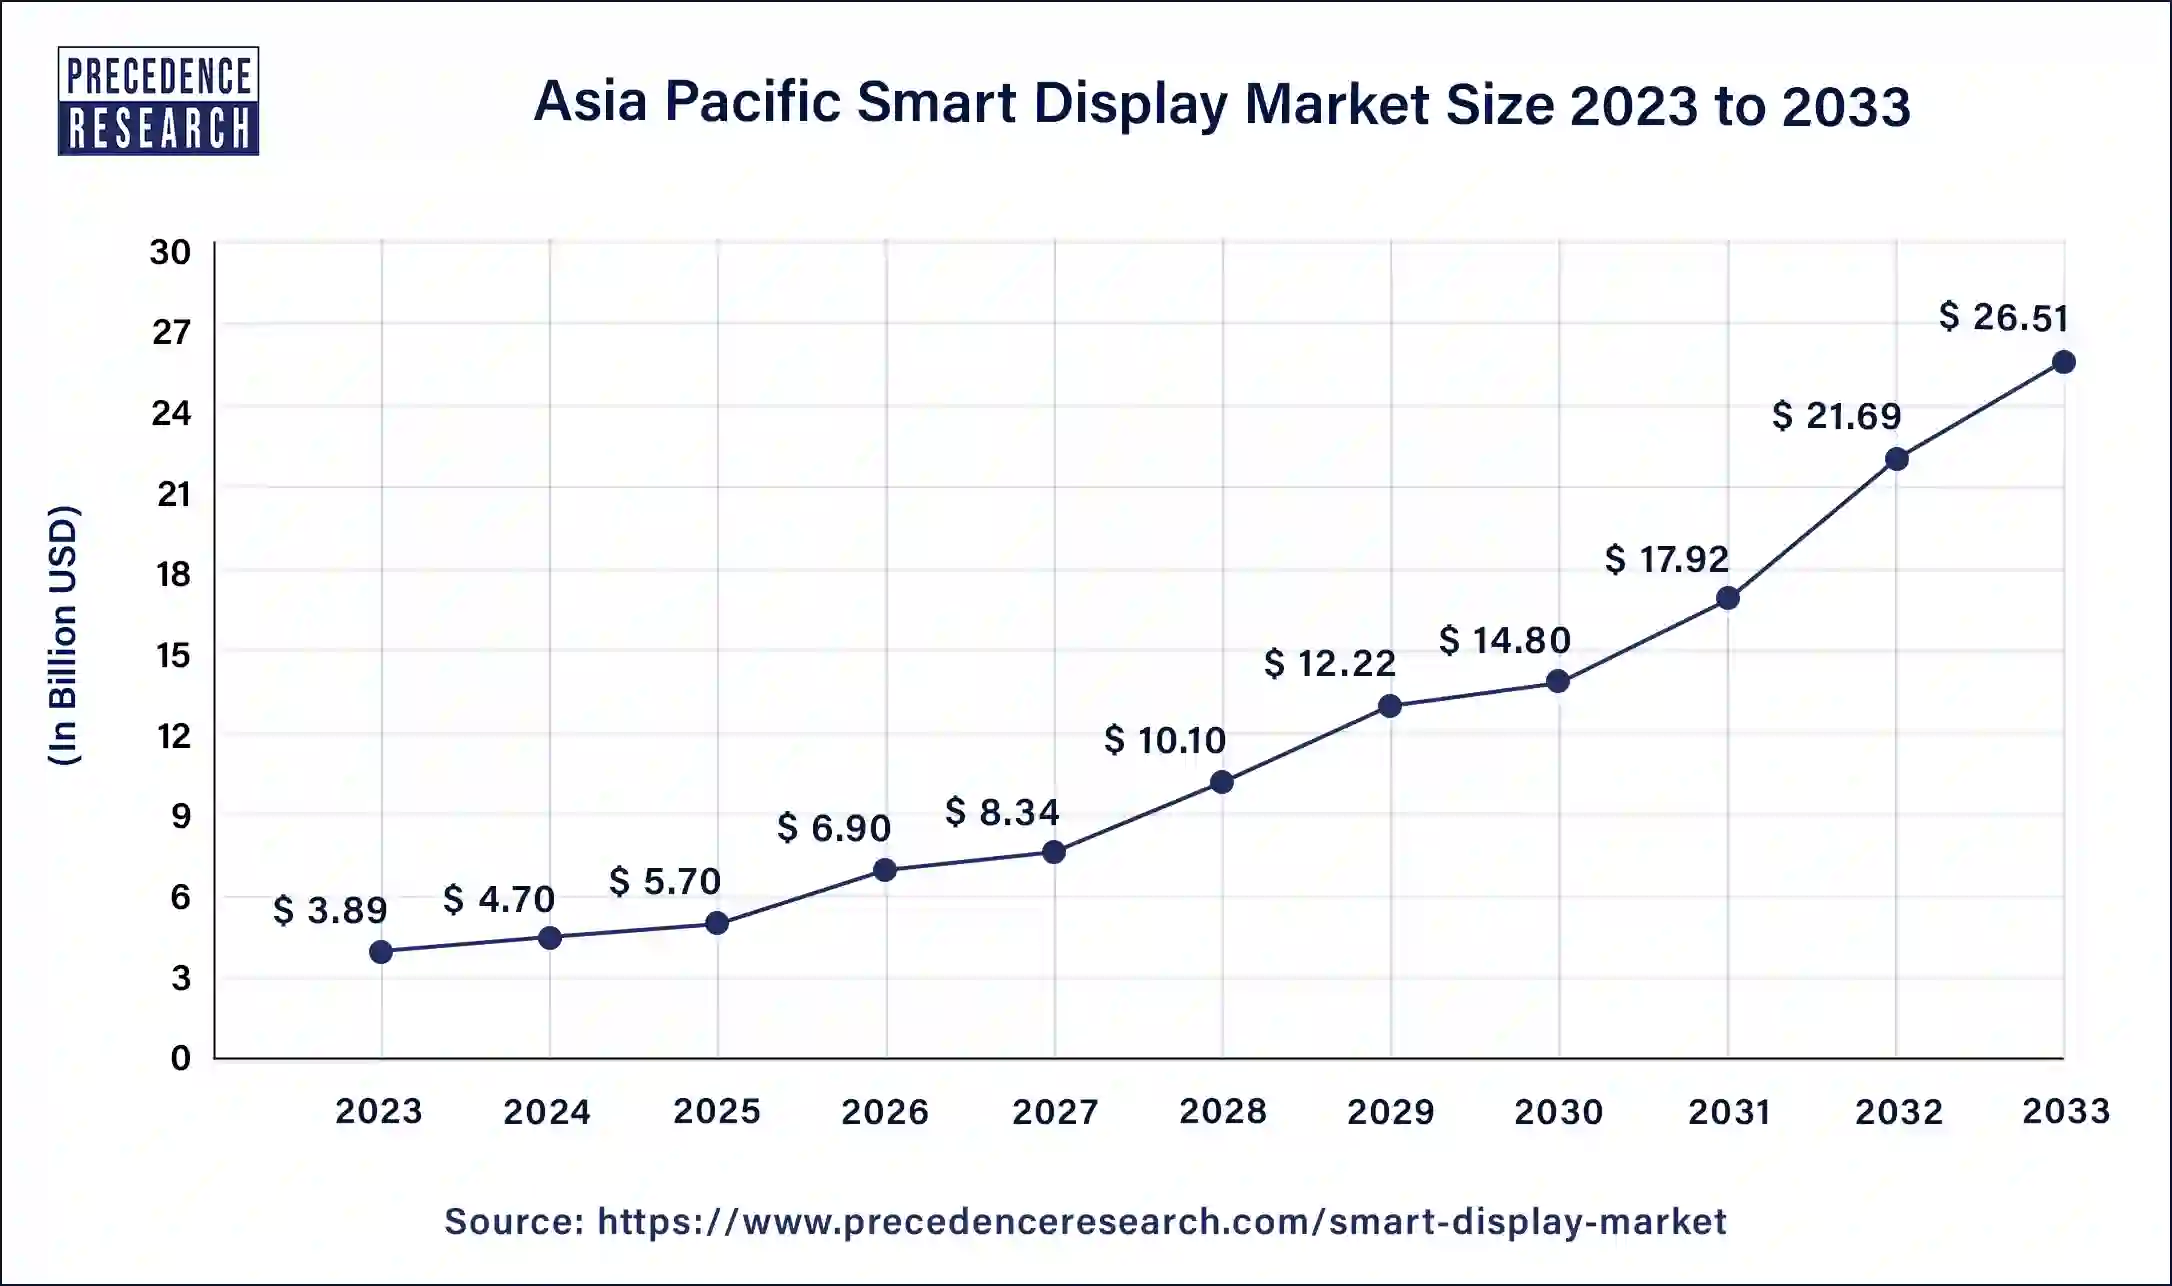 Asia Pacific Smart Display Market Size 2024 to 2033